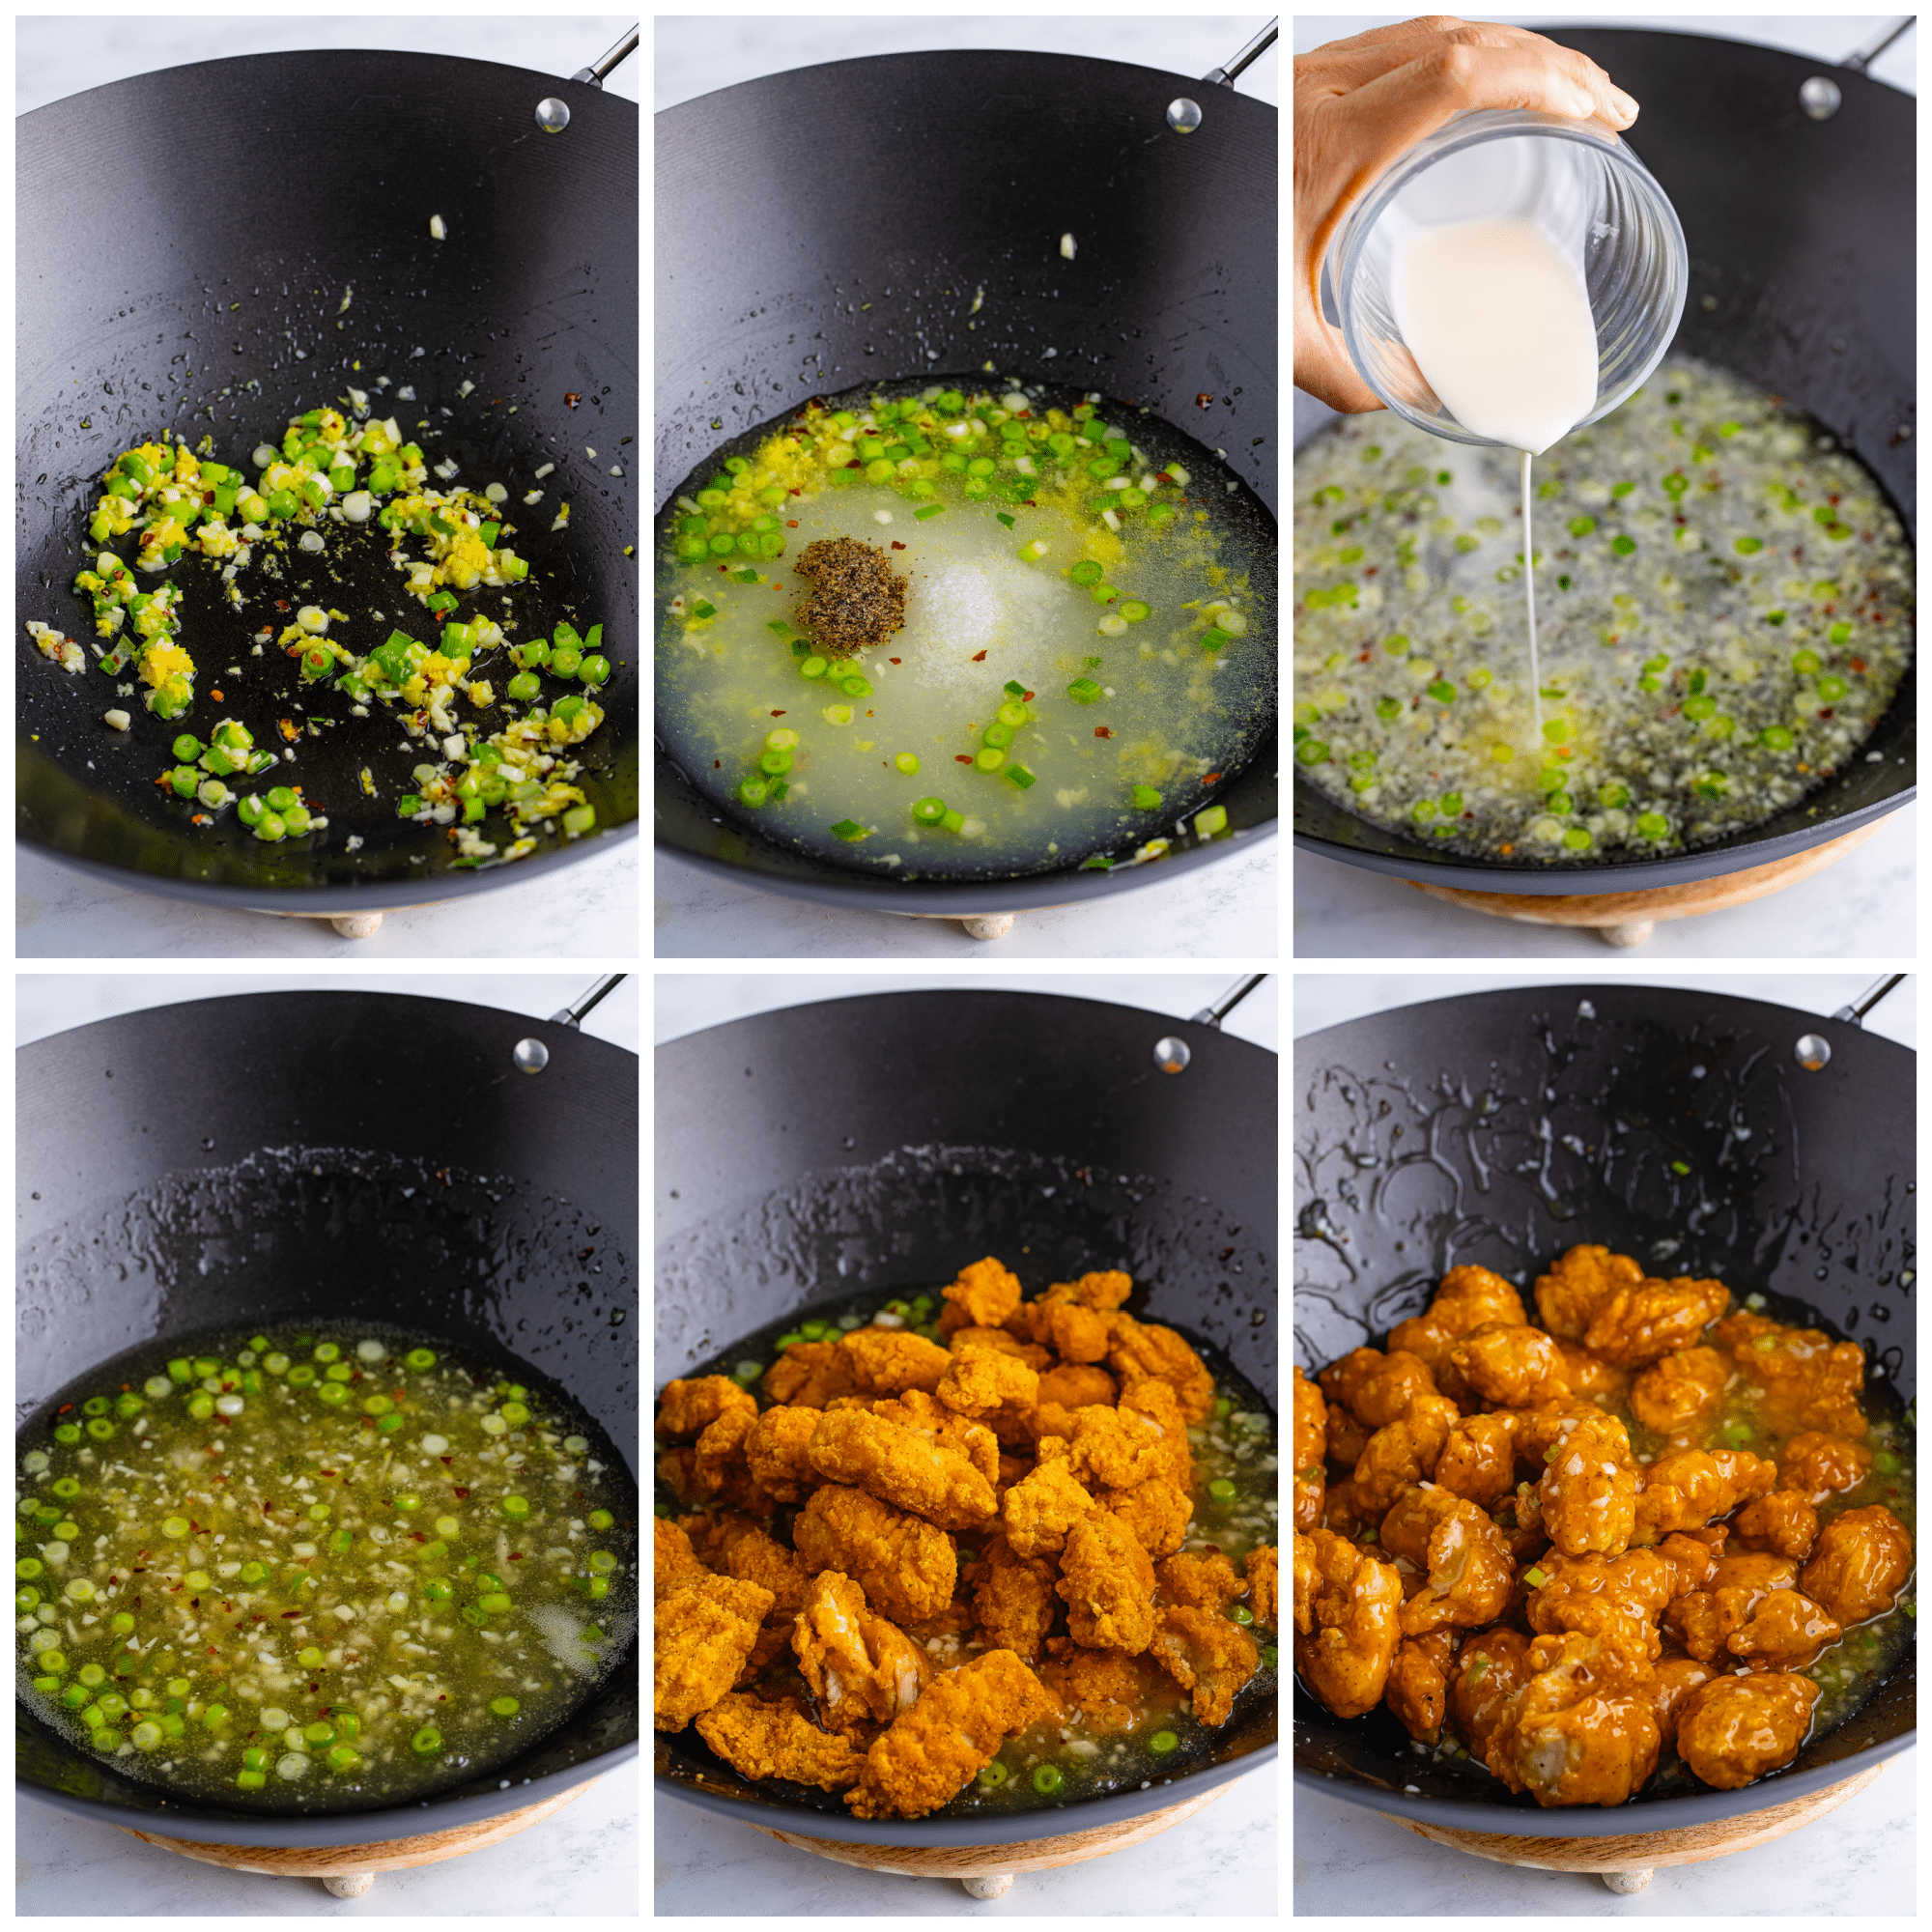 A college image showing the step by step process for making this recipe.